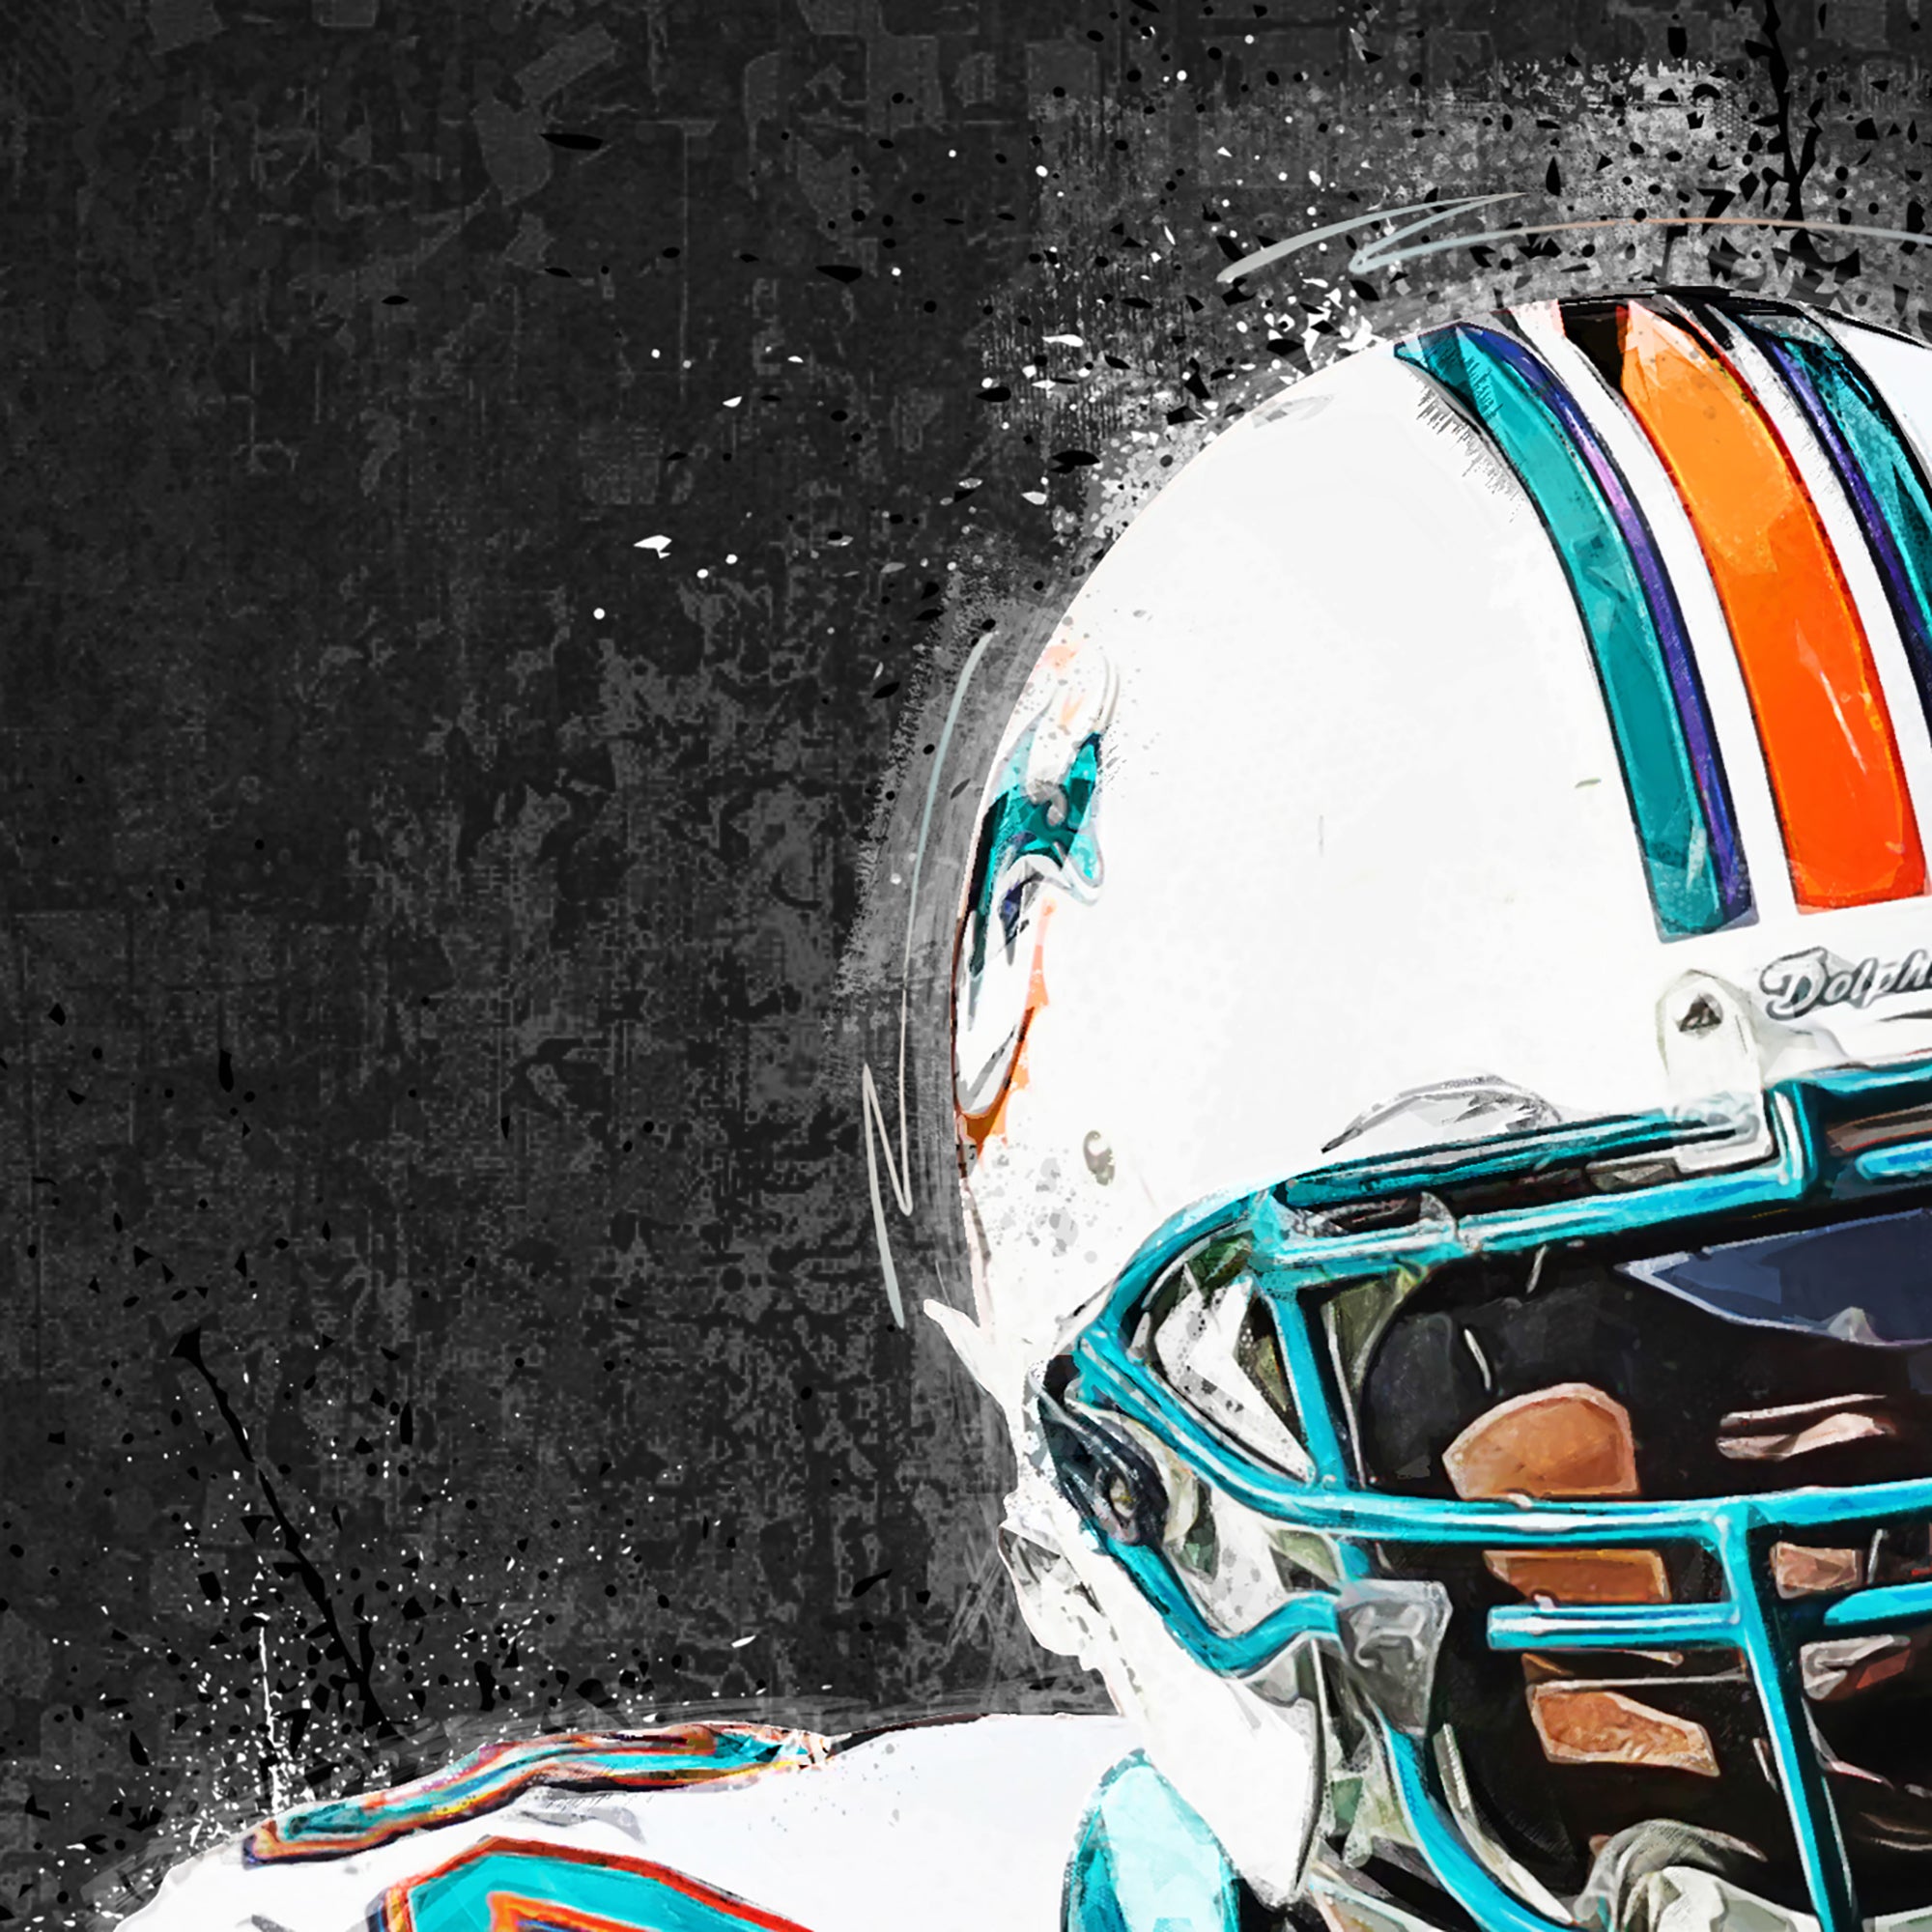 Buy Ricky Williams Miami Dolphins Poster/canvas Print Watercolor